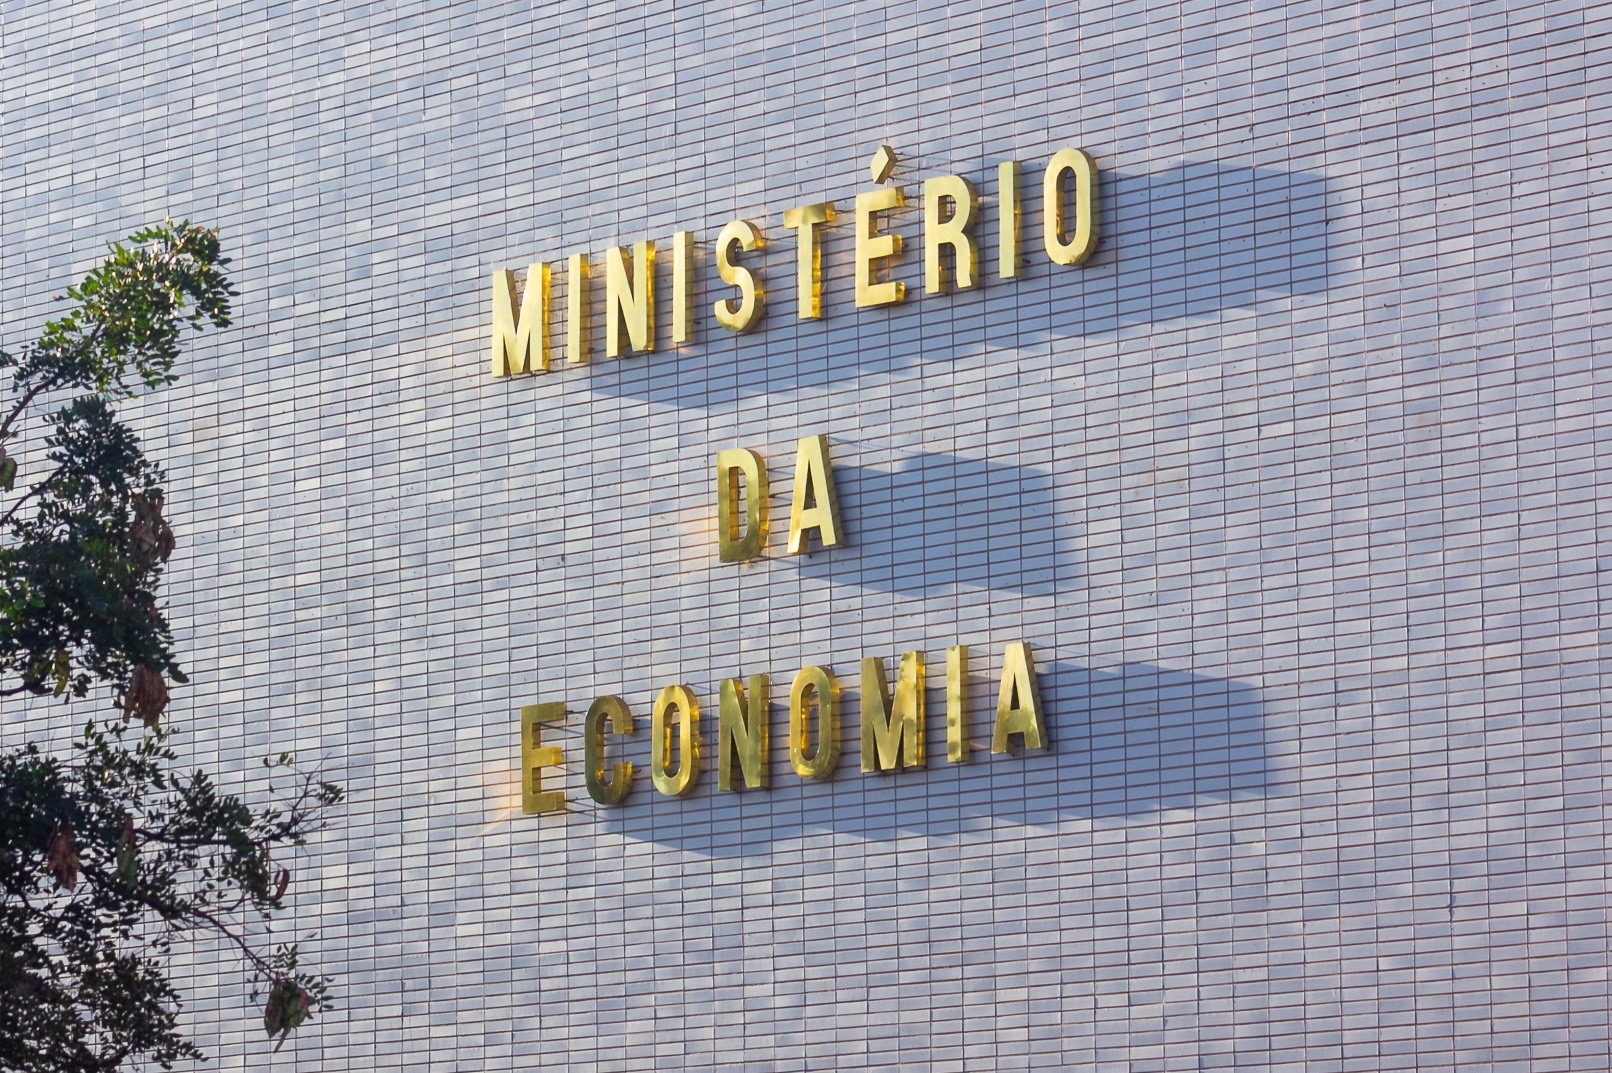 Brazil central government primary deficit jumps 37.7% in February By Reuters